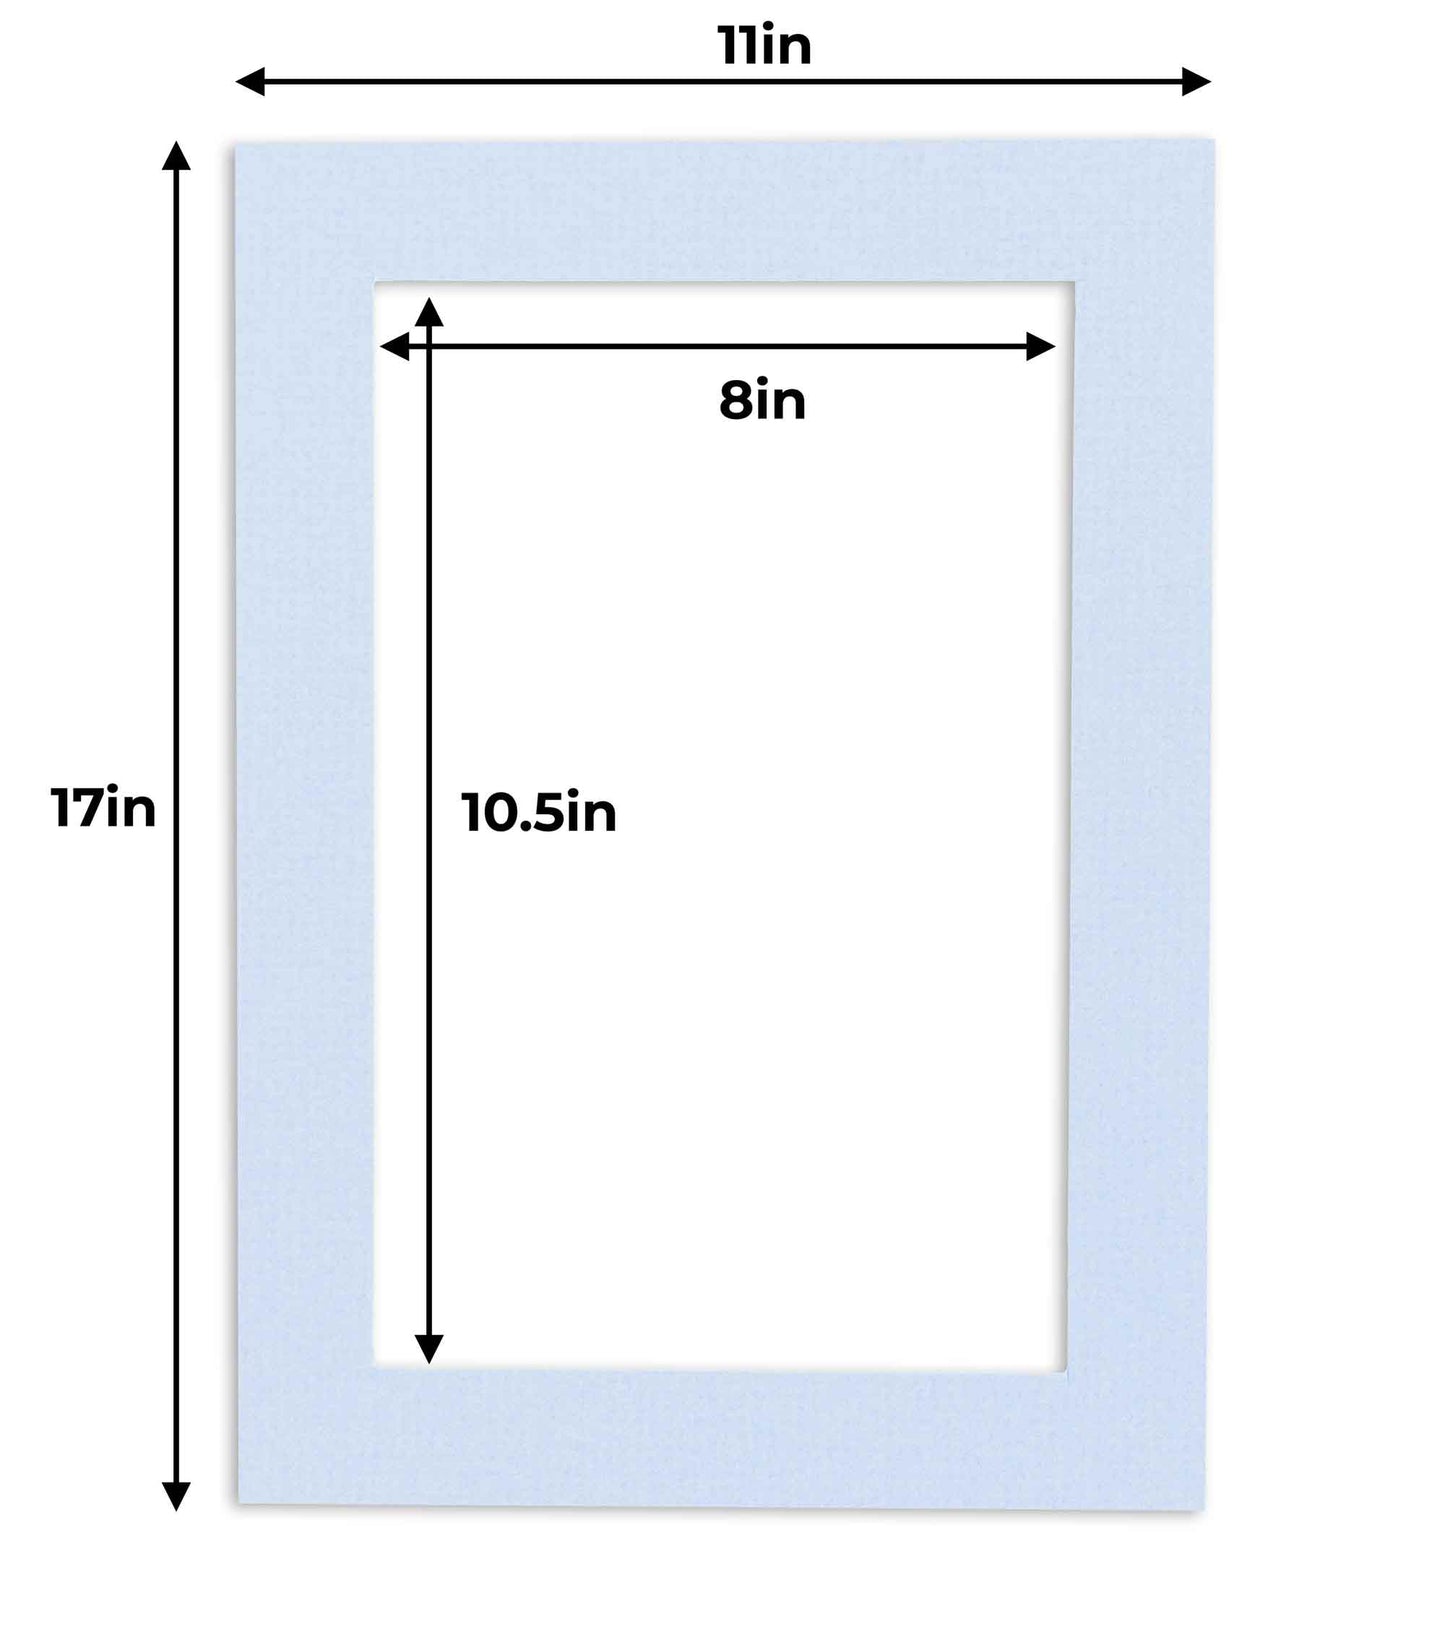 Pack of 25 Brittany Blue Precut Acid-Free Matboards